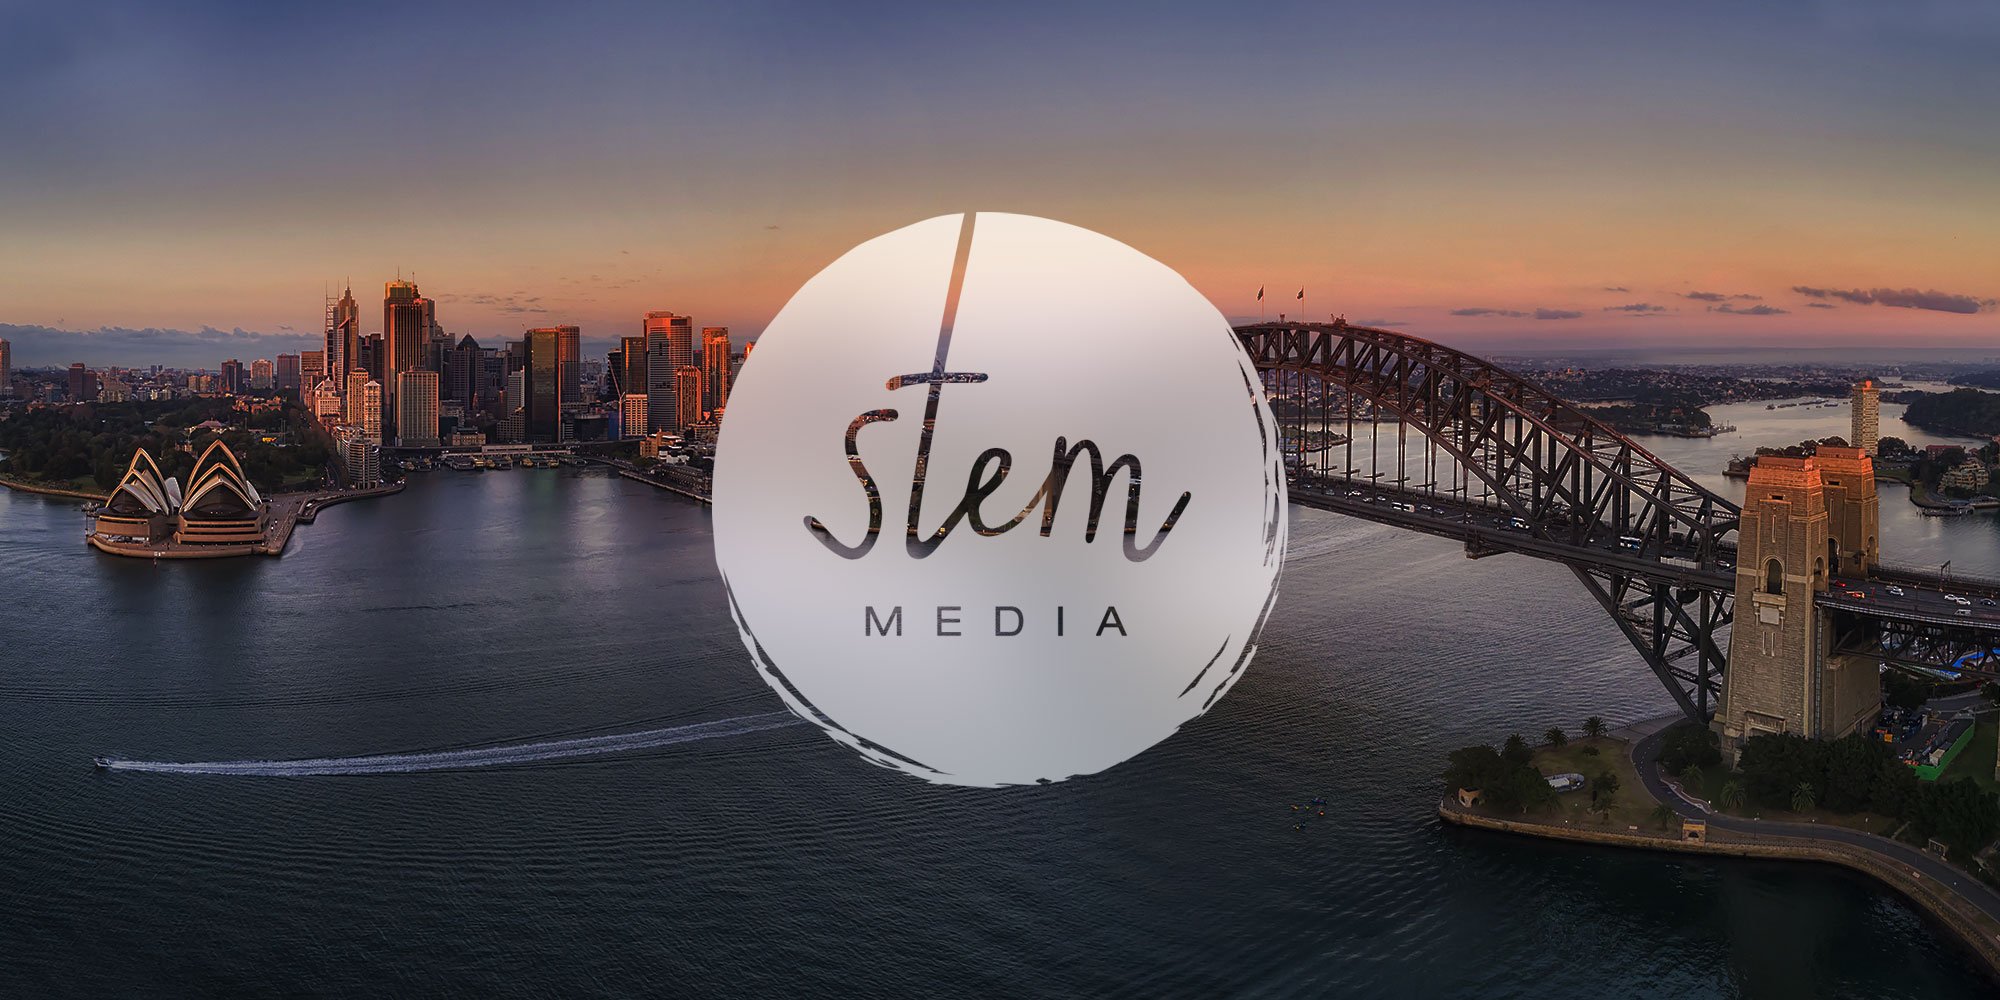 7Mountains signes reseller agreement with Stem Media